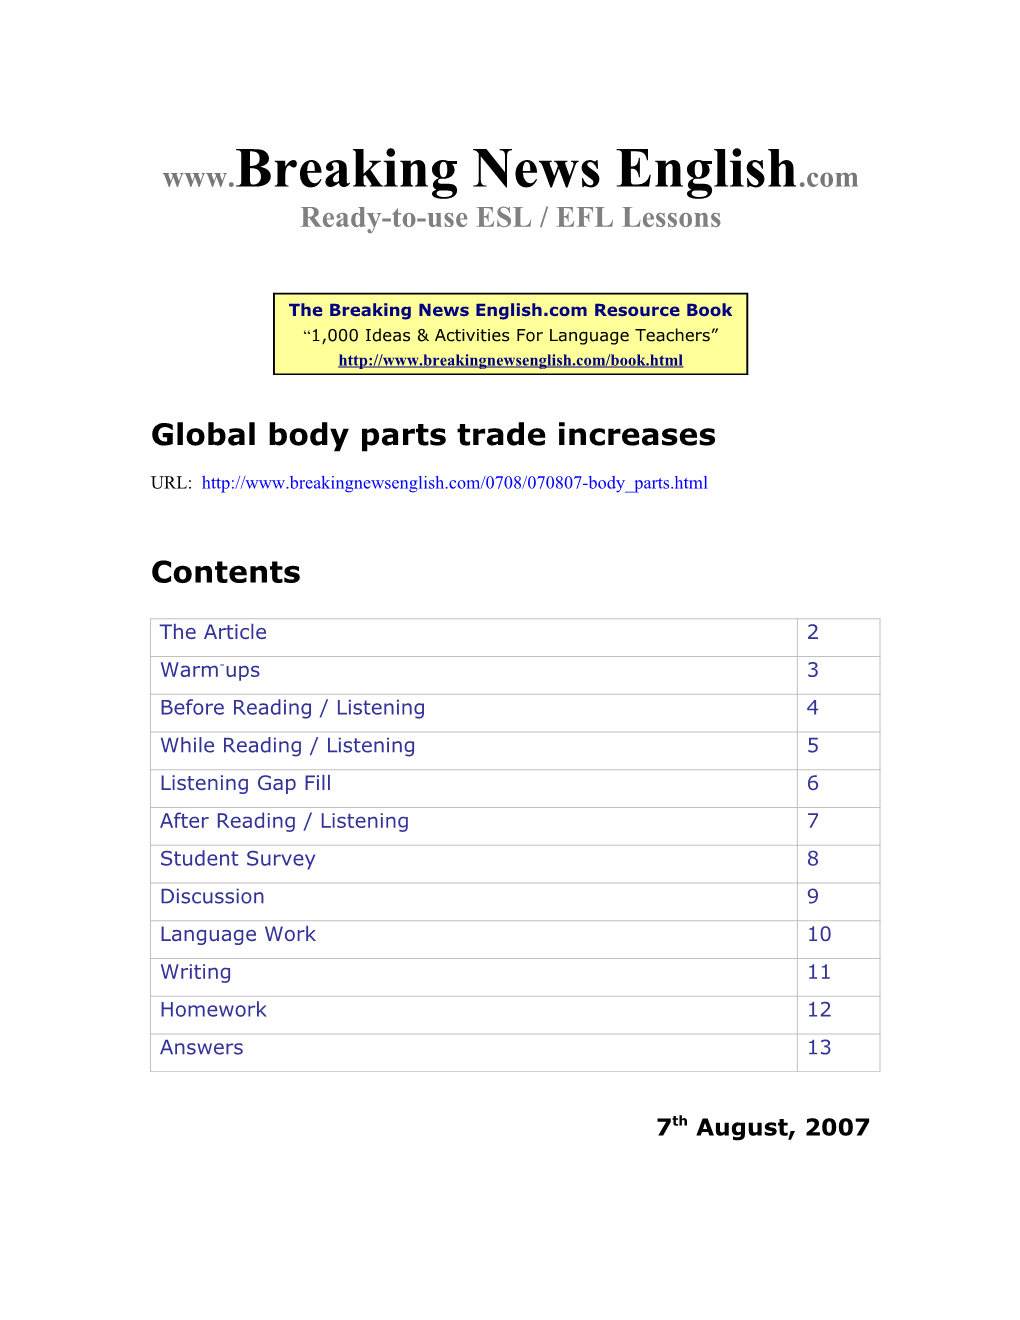 Global Body Parts Trade Increases